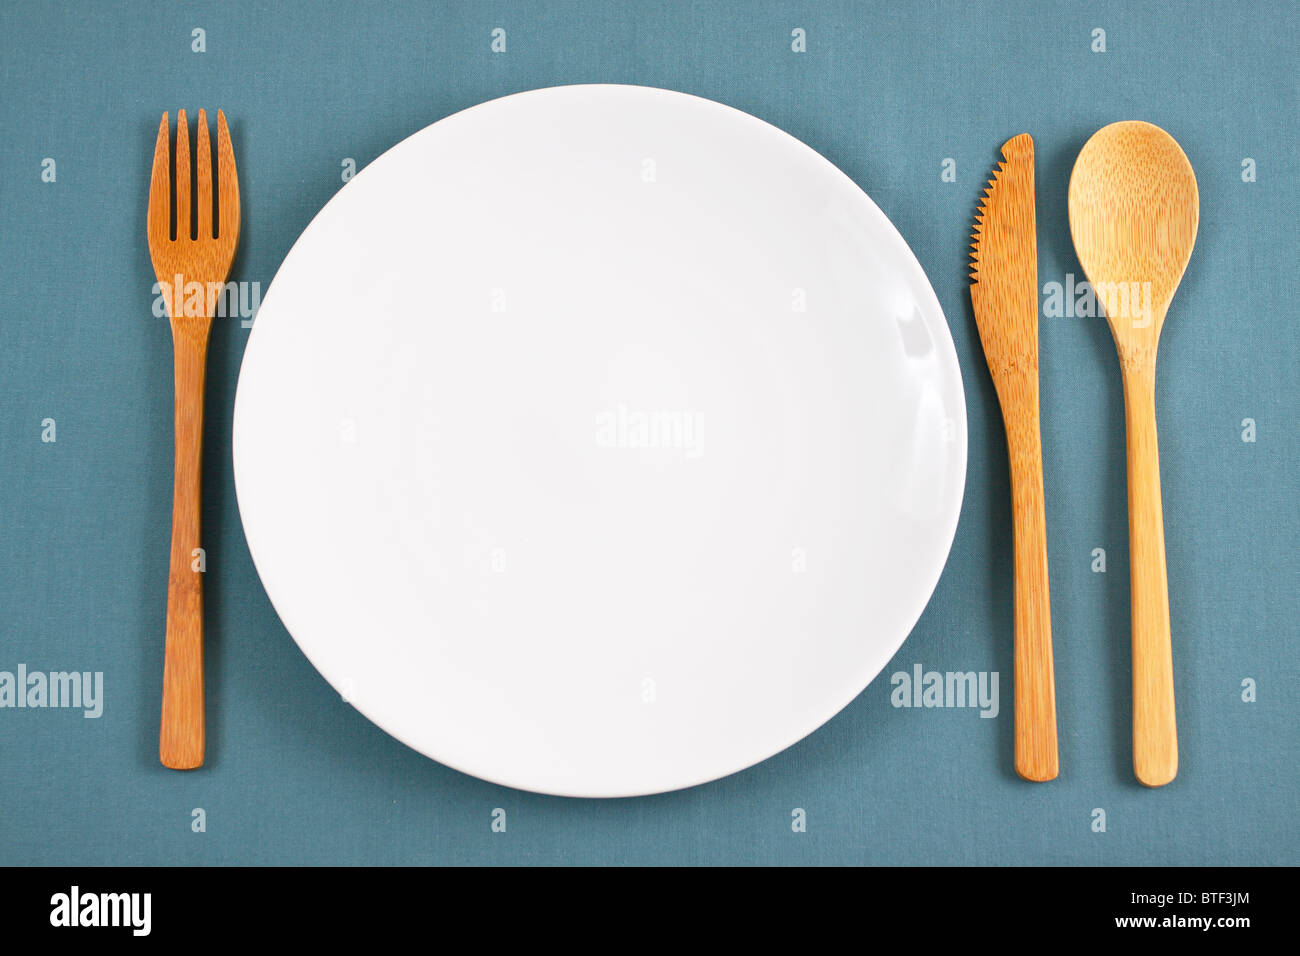 Bamboo placesetting with white plate Stock Photo